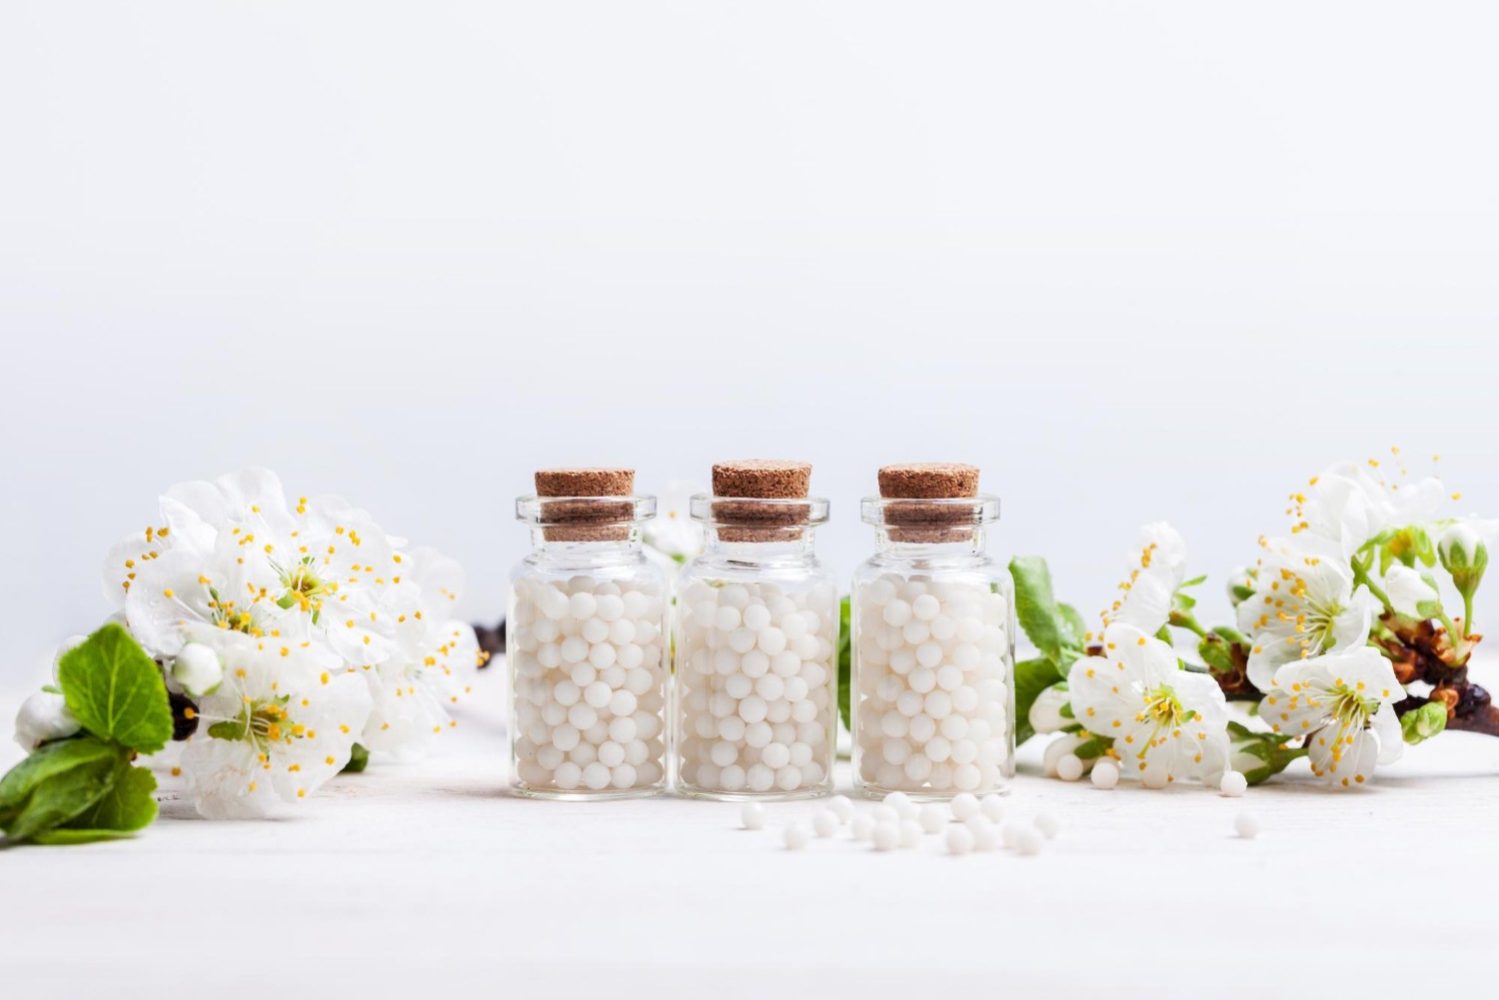 homeopathic-pills-with-spring-flowers-white-wooden-background